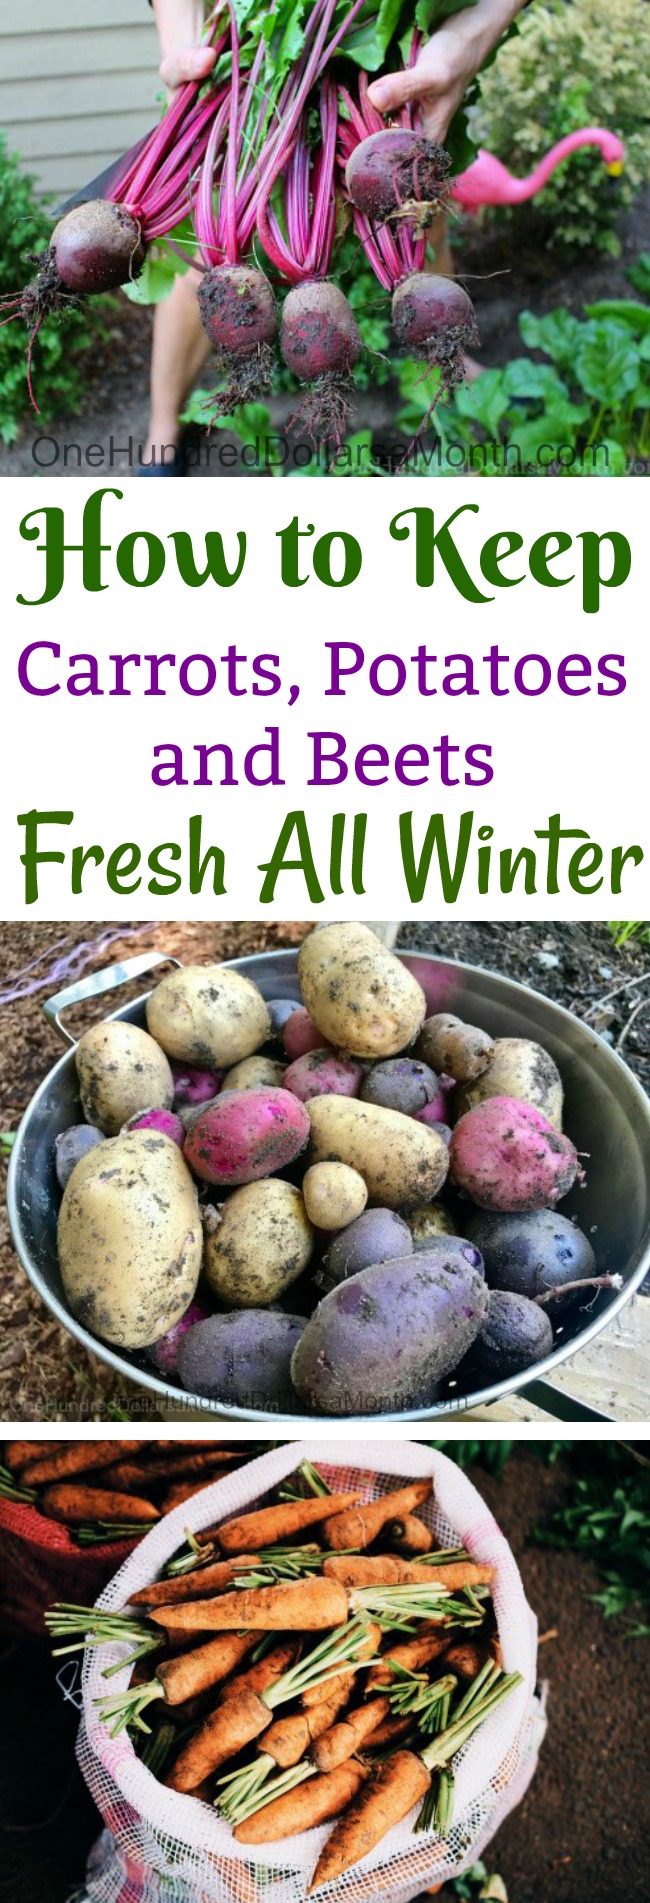 How to Keep Carrots, Potatoes and Beets Fresh All Winter